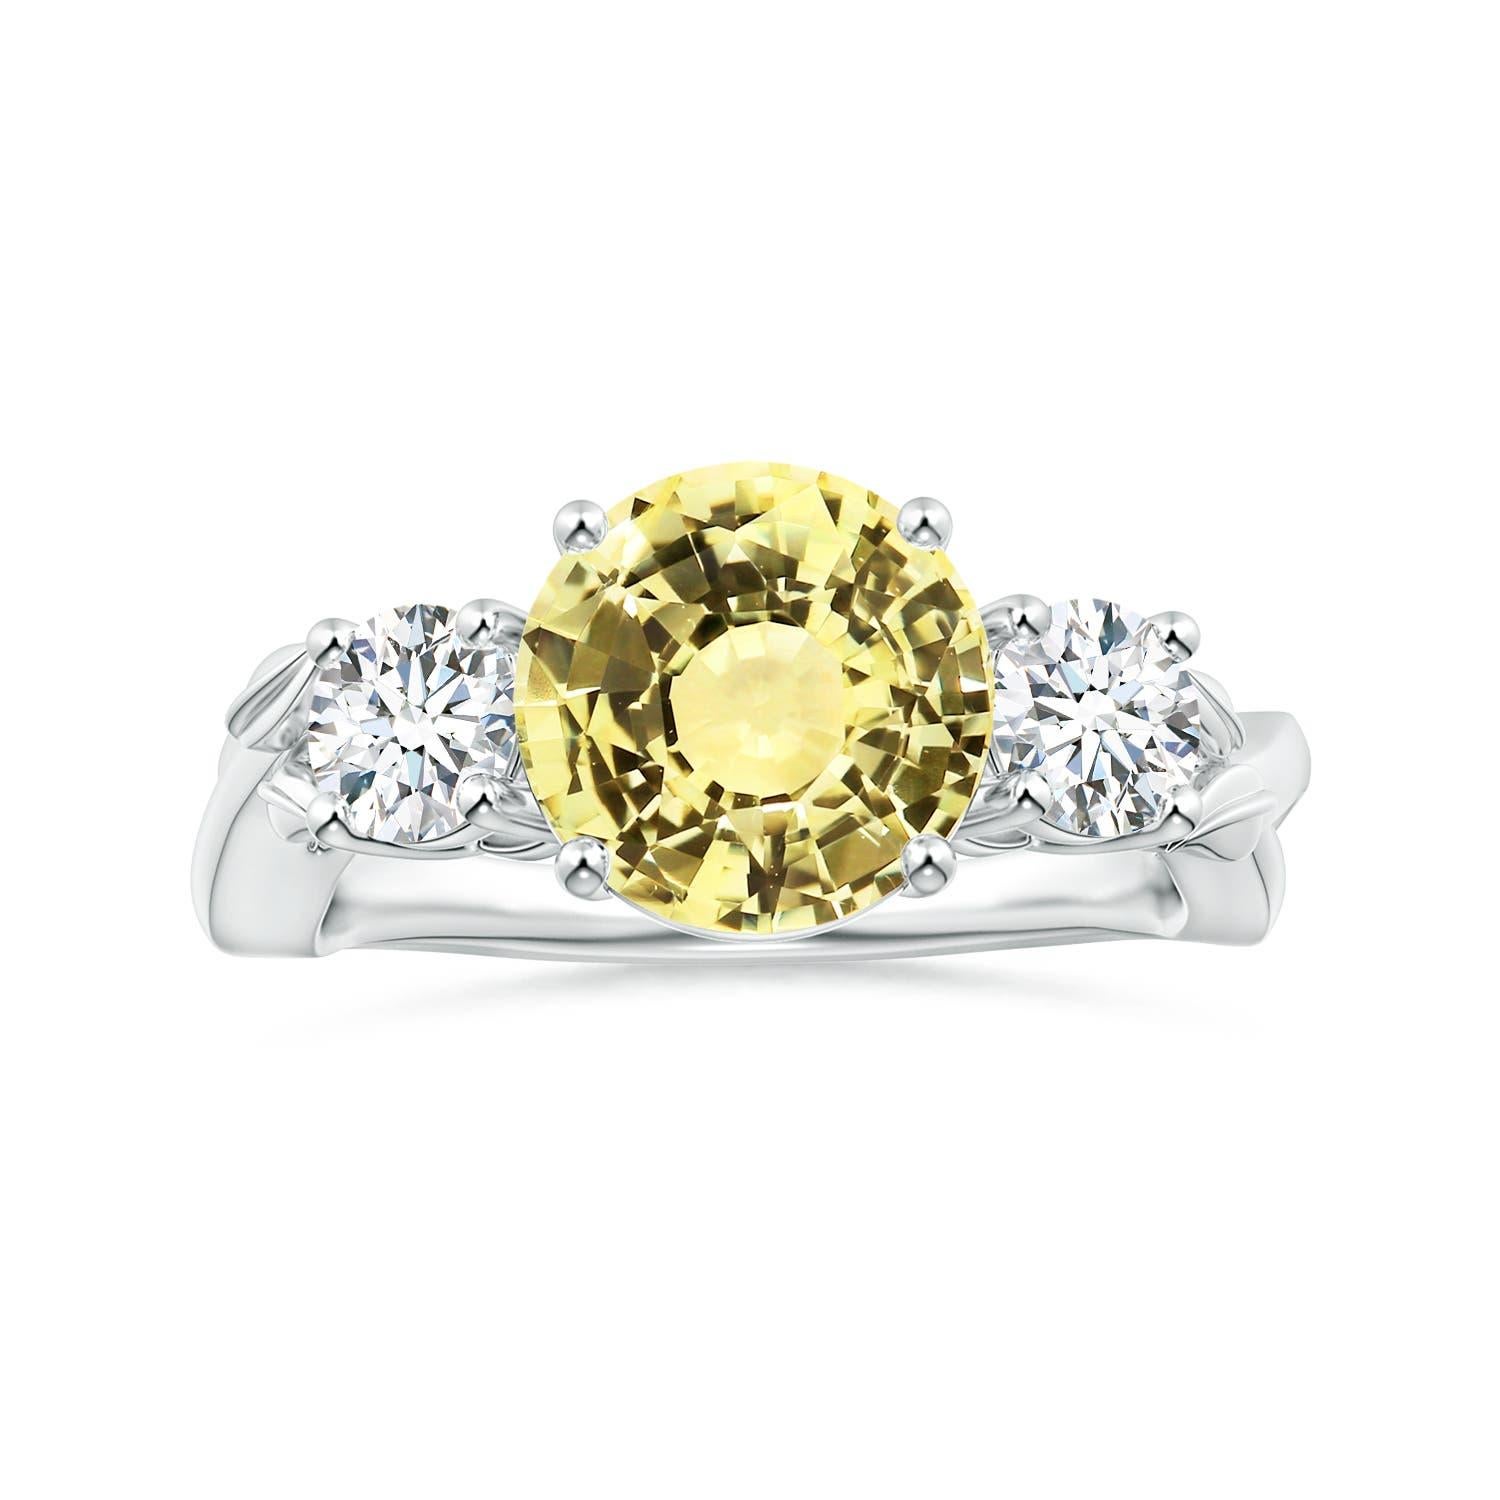 For Sale:  Angara Gia Certified Yellow Sapphire 3-Stone Ring in White Gold with Diamonds